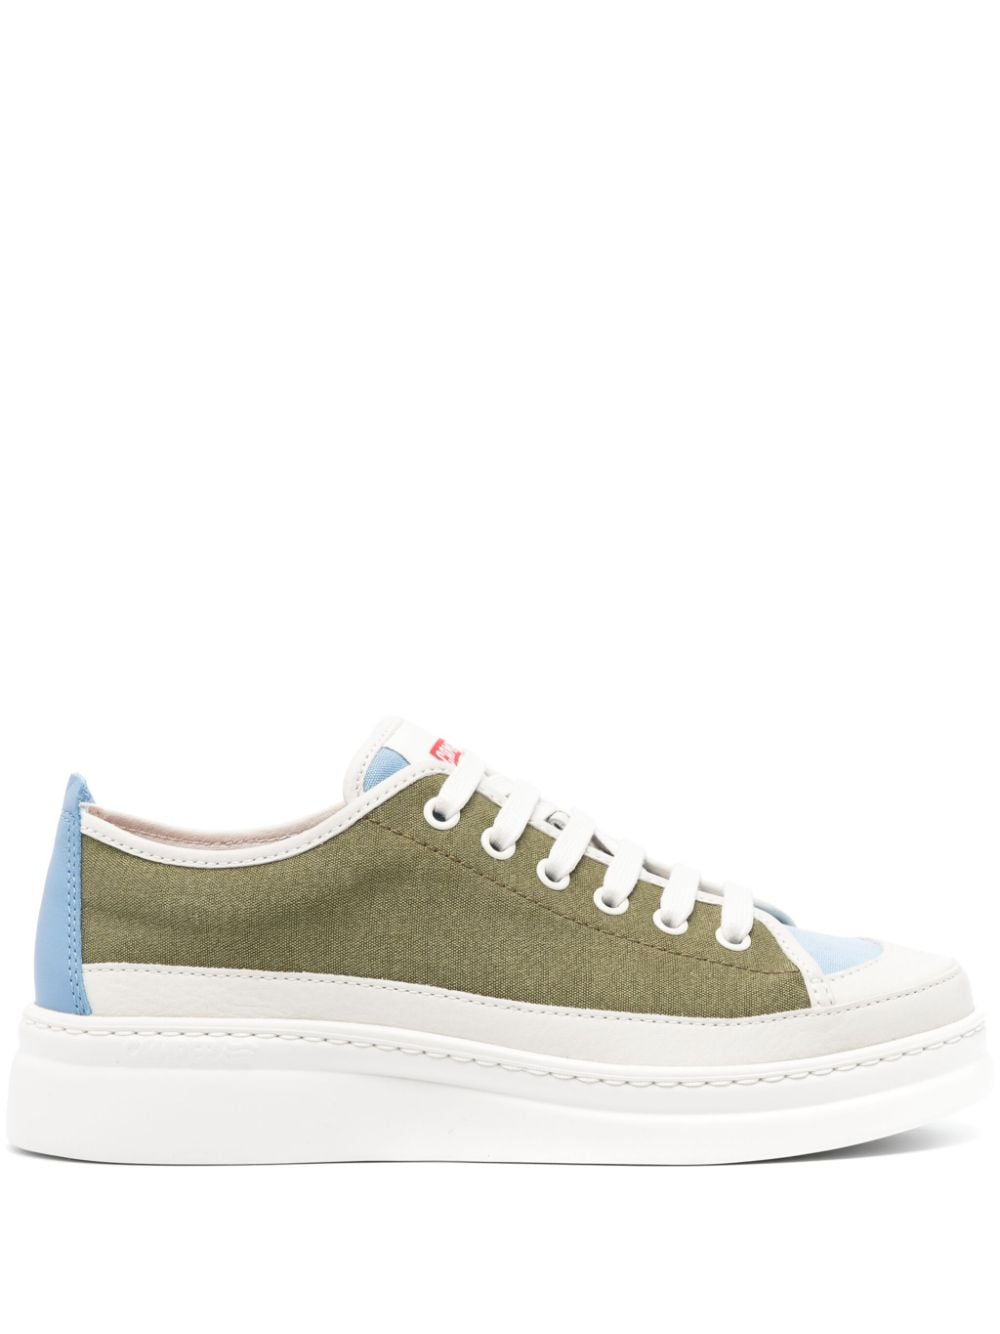 Camper Runner Up Twins Panelled Sneakers In Green Multi